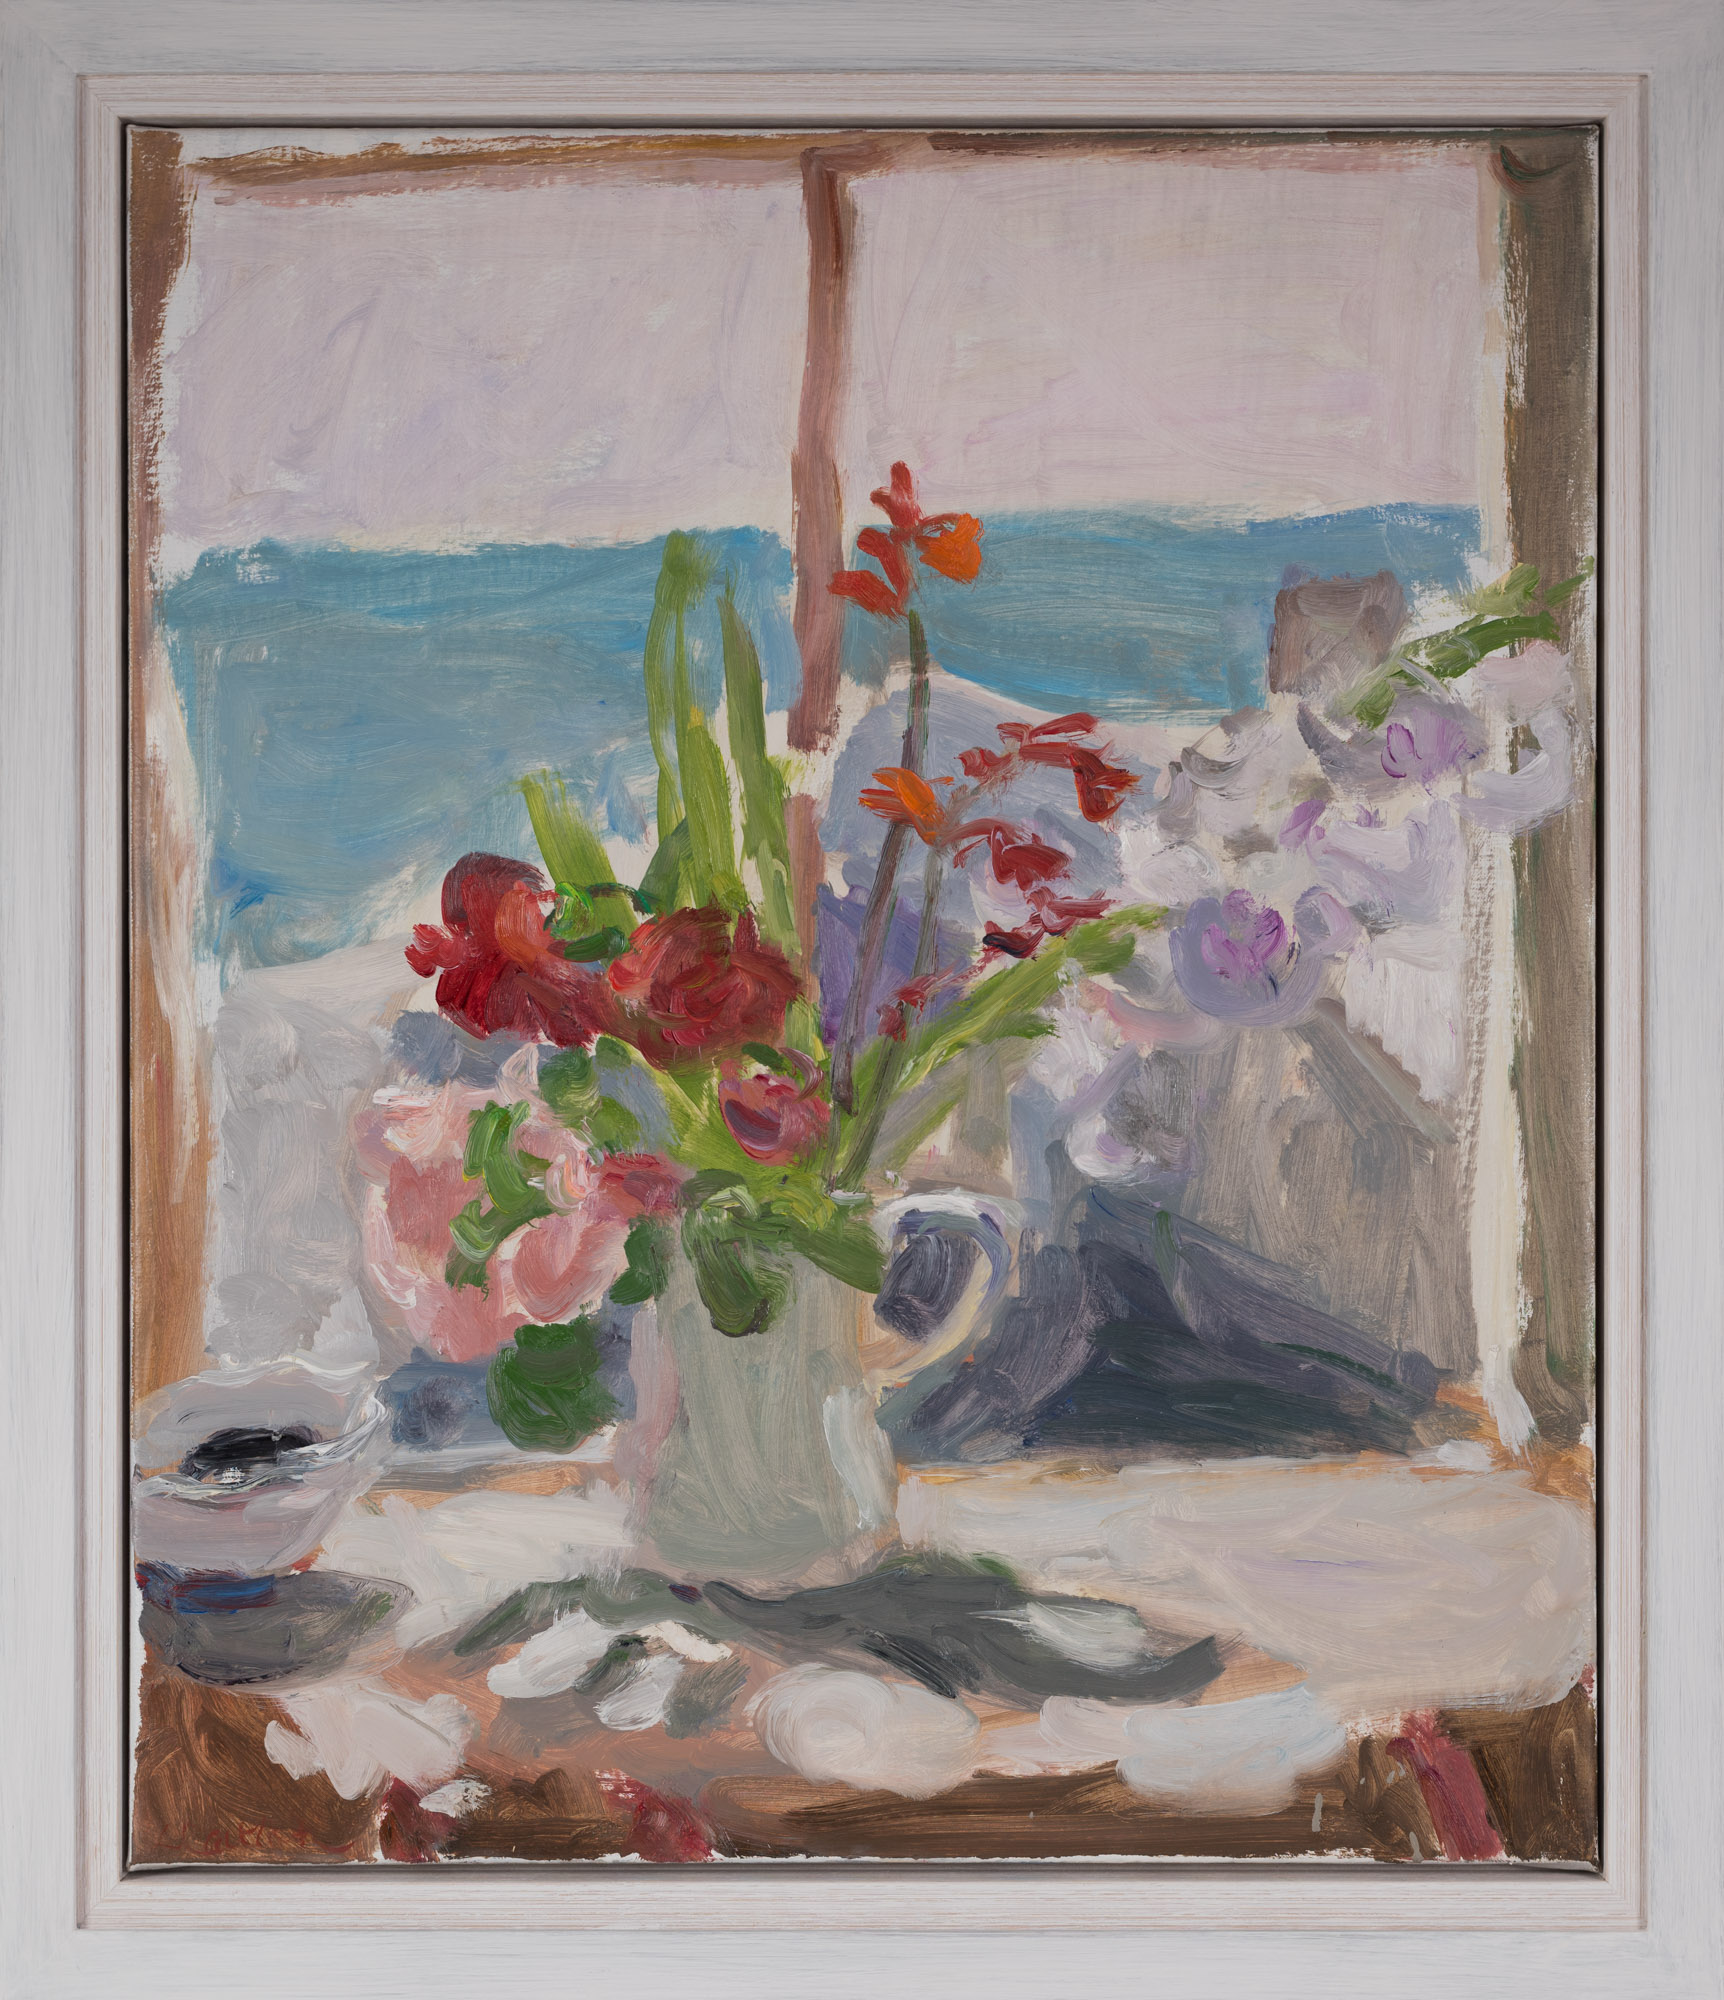 Sea View and Summer Flowers